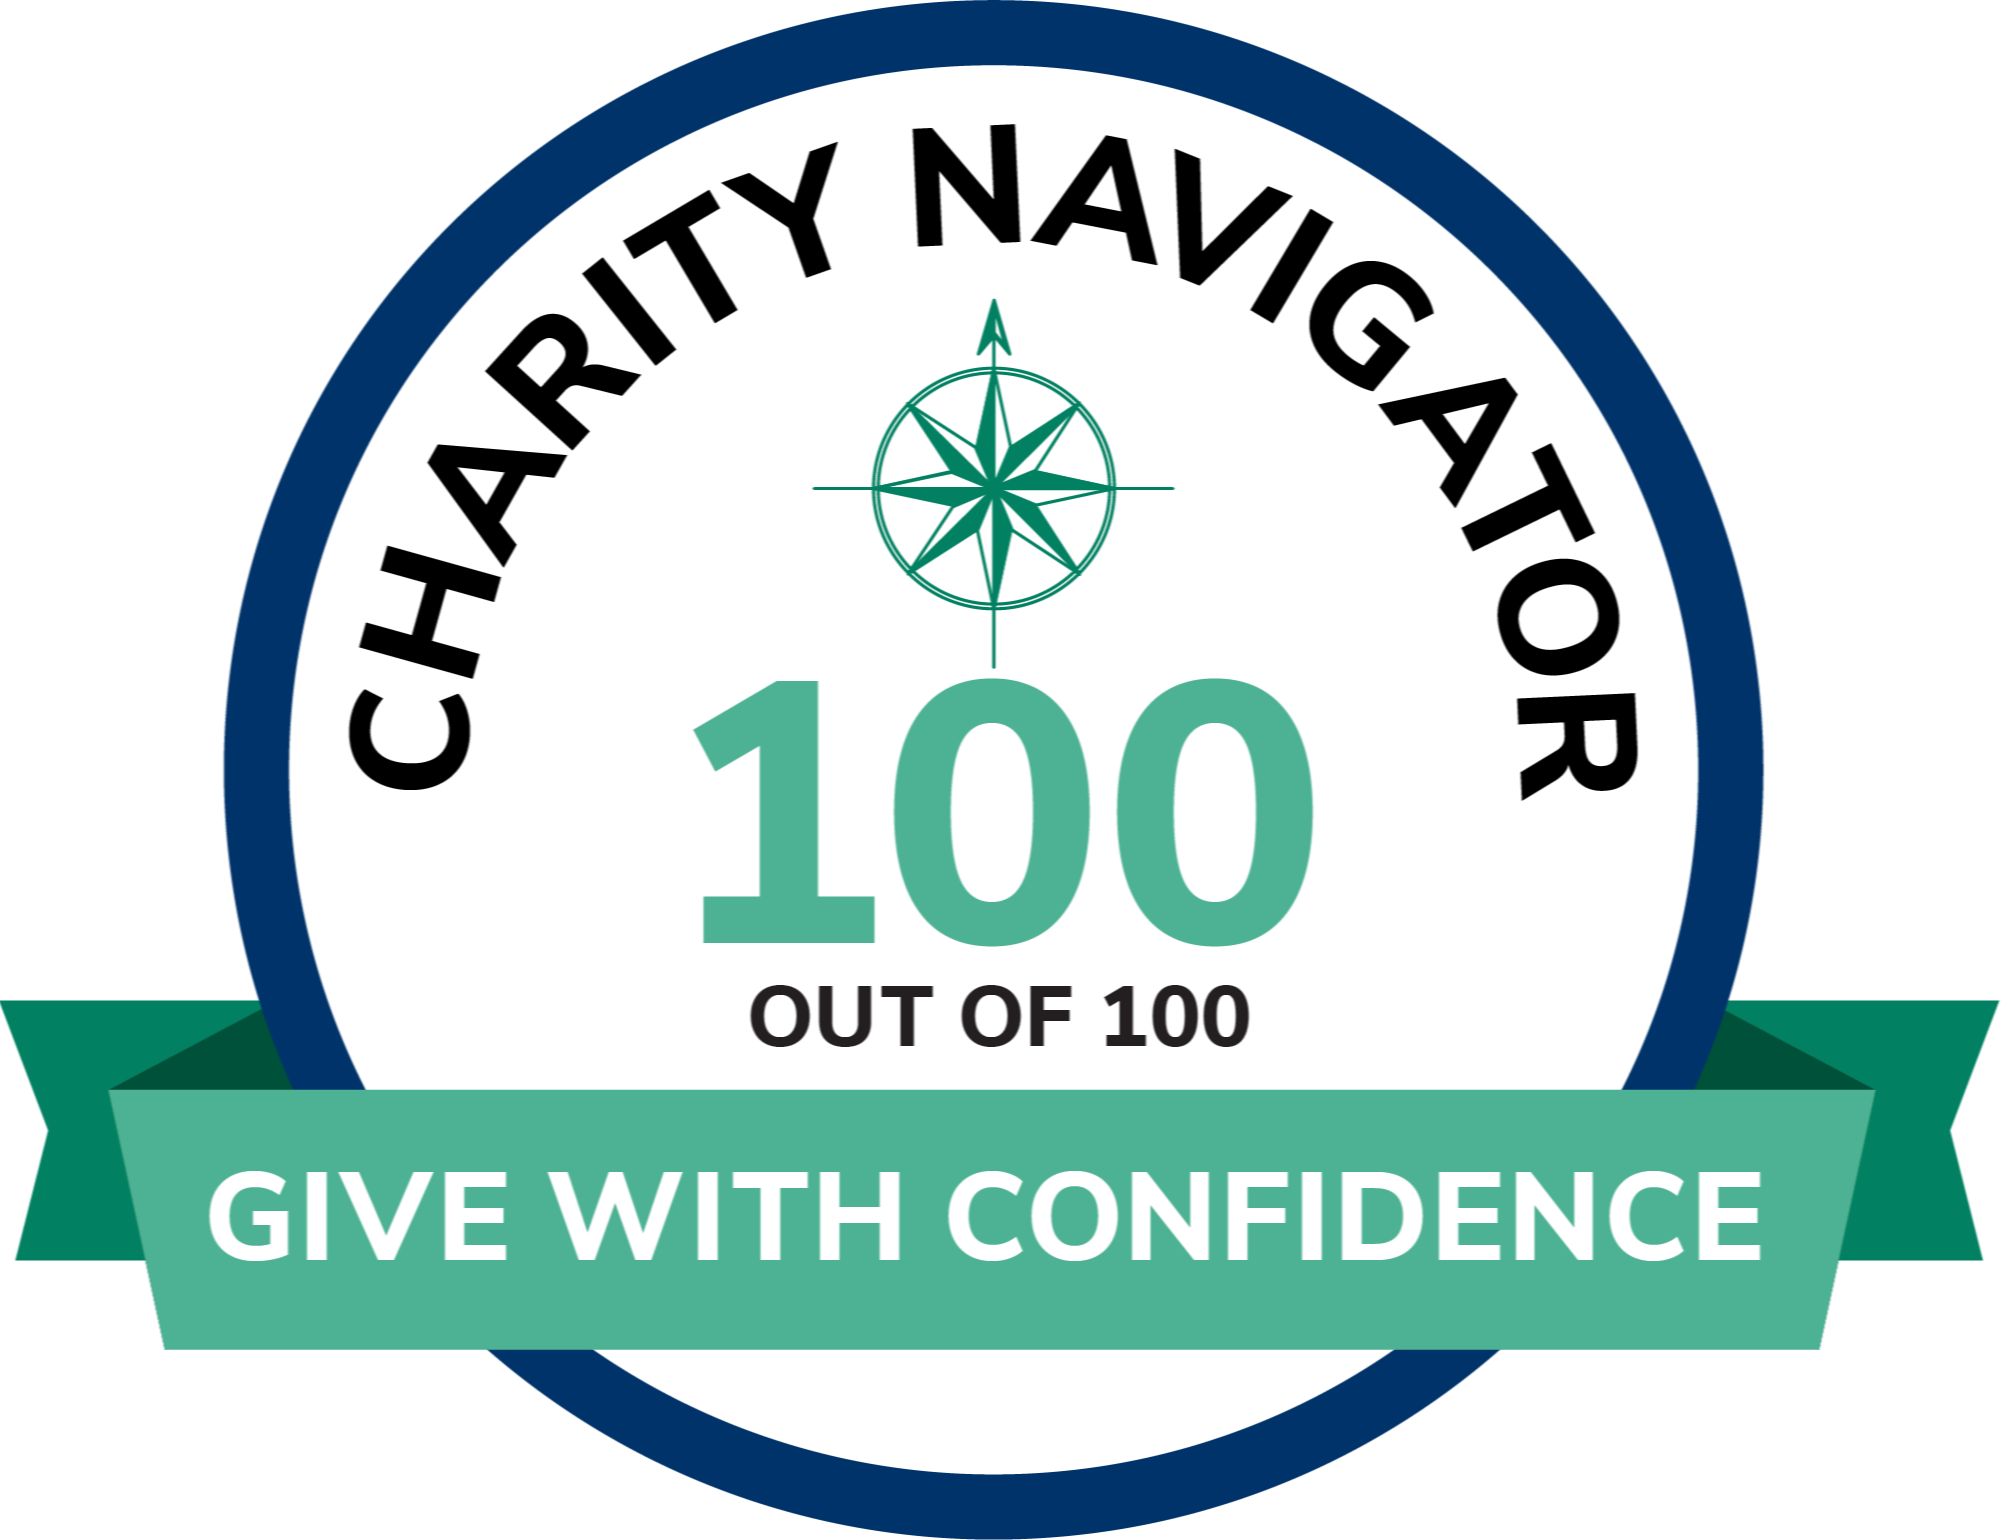 Charity Navigator. 100 out of 100. give with confidence